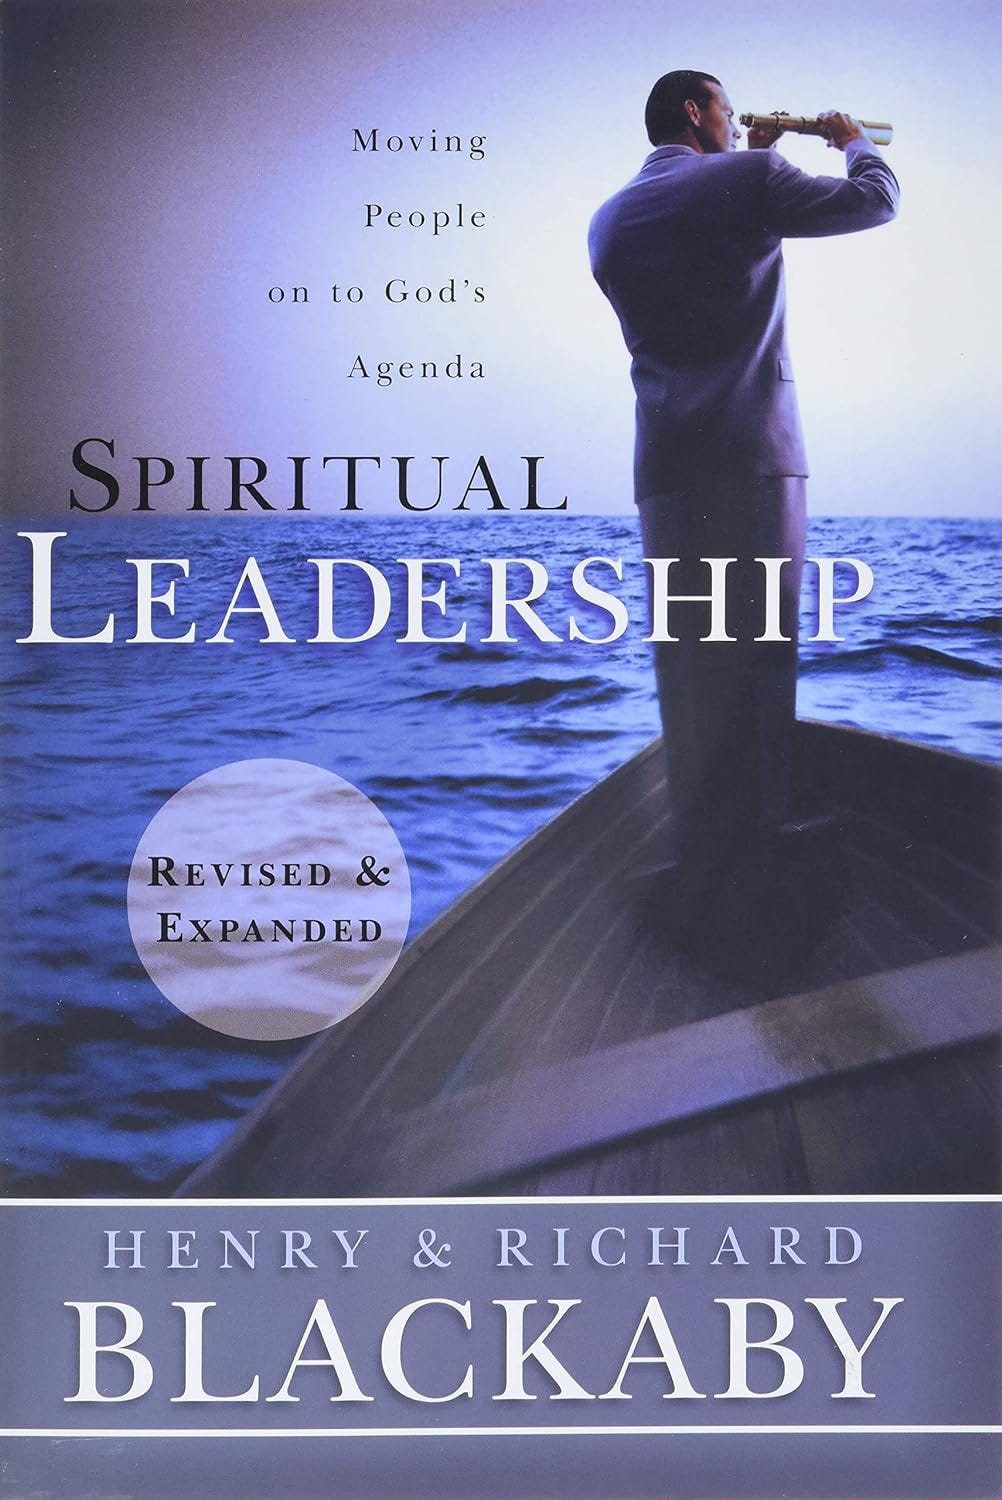 Image of book cover to Henry Blackaby's book, Spiritual Leadership.